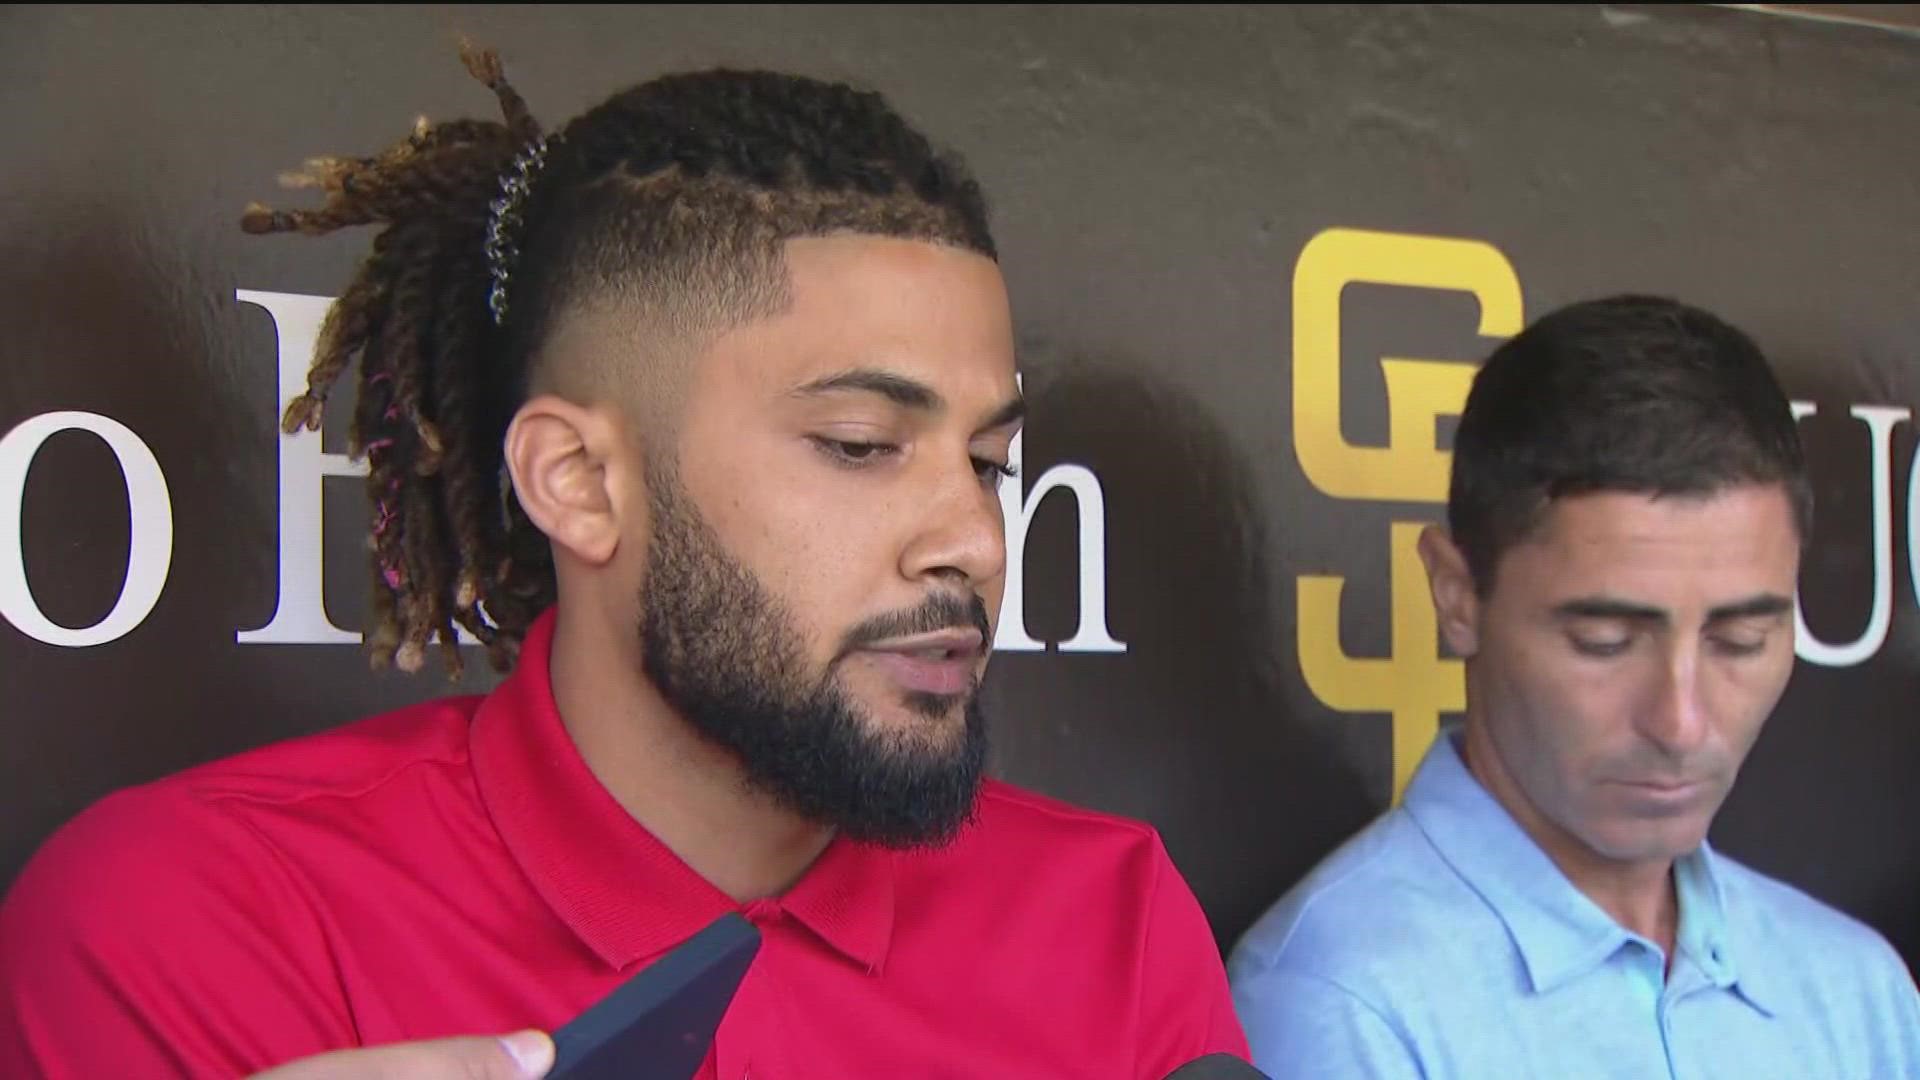 "At the end of the day, there are no excuses and there is no other one to blame than me," Fernando Tatis, Jr. said during his meeting with the media.